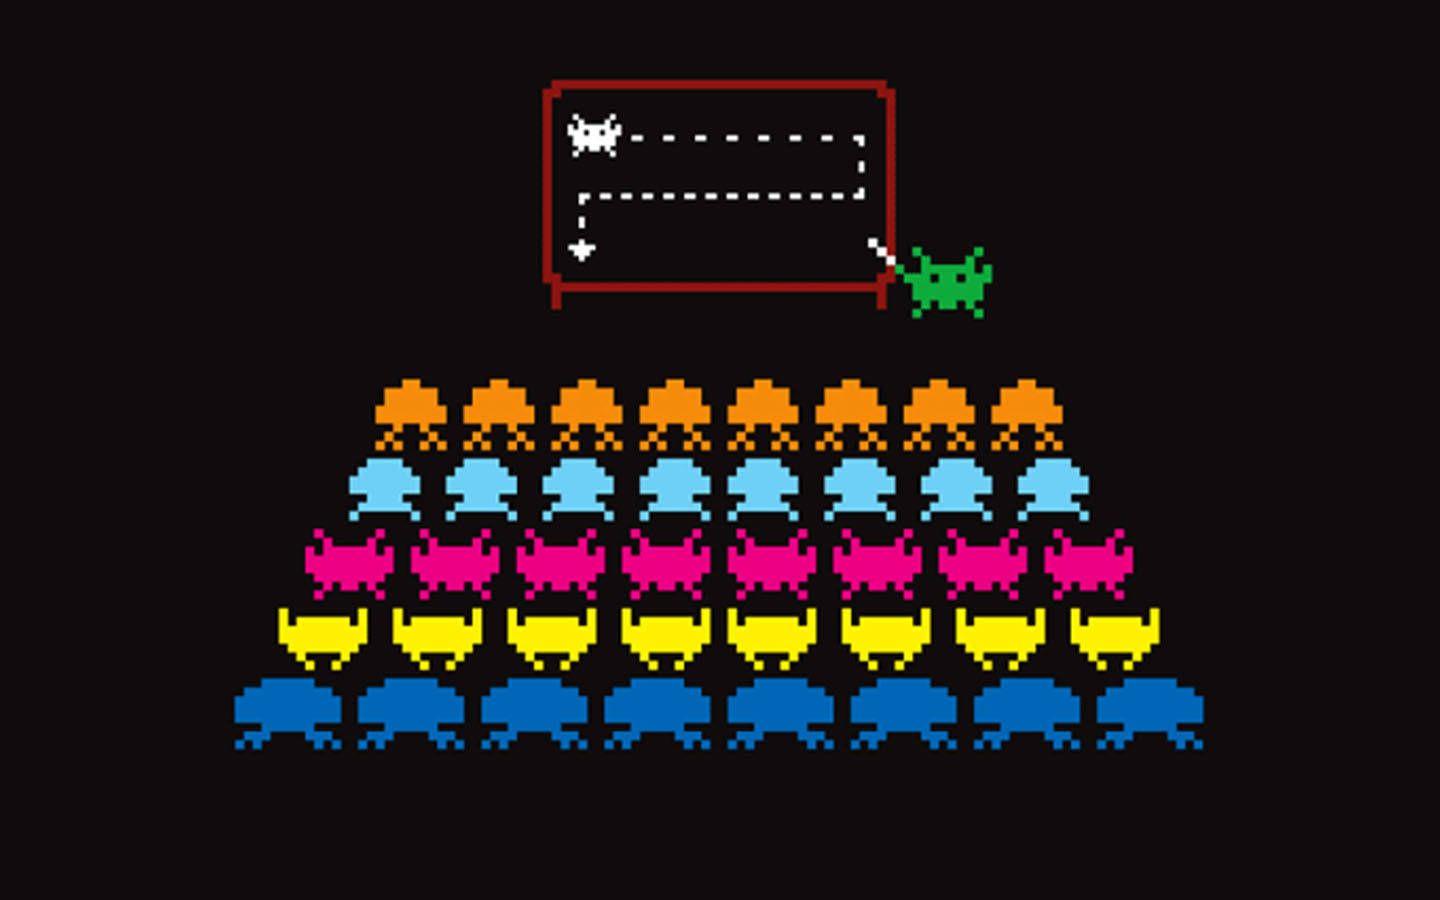 Space Invaders 1440×900 Wallpaper 819013